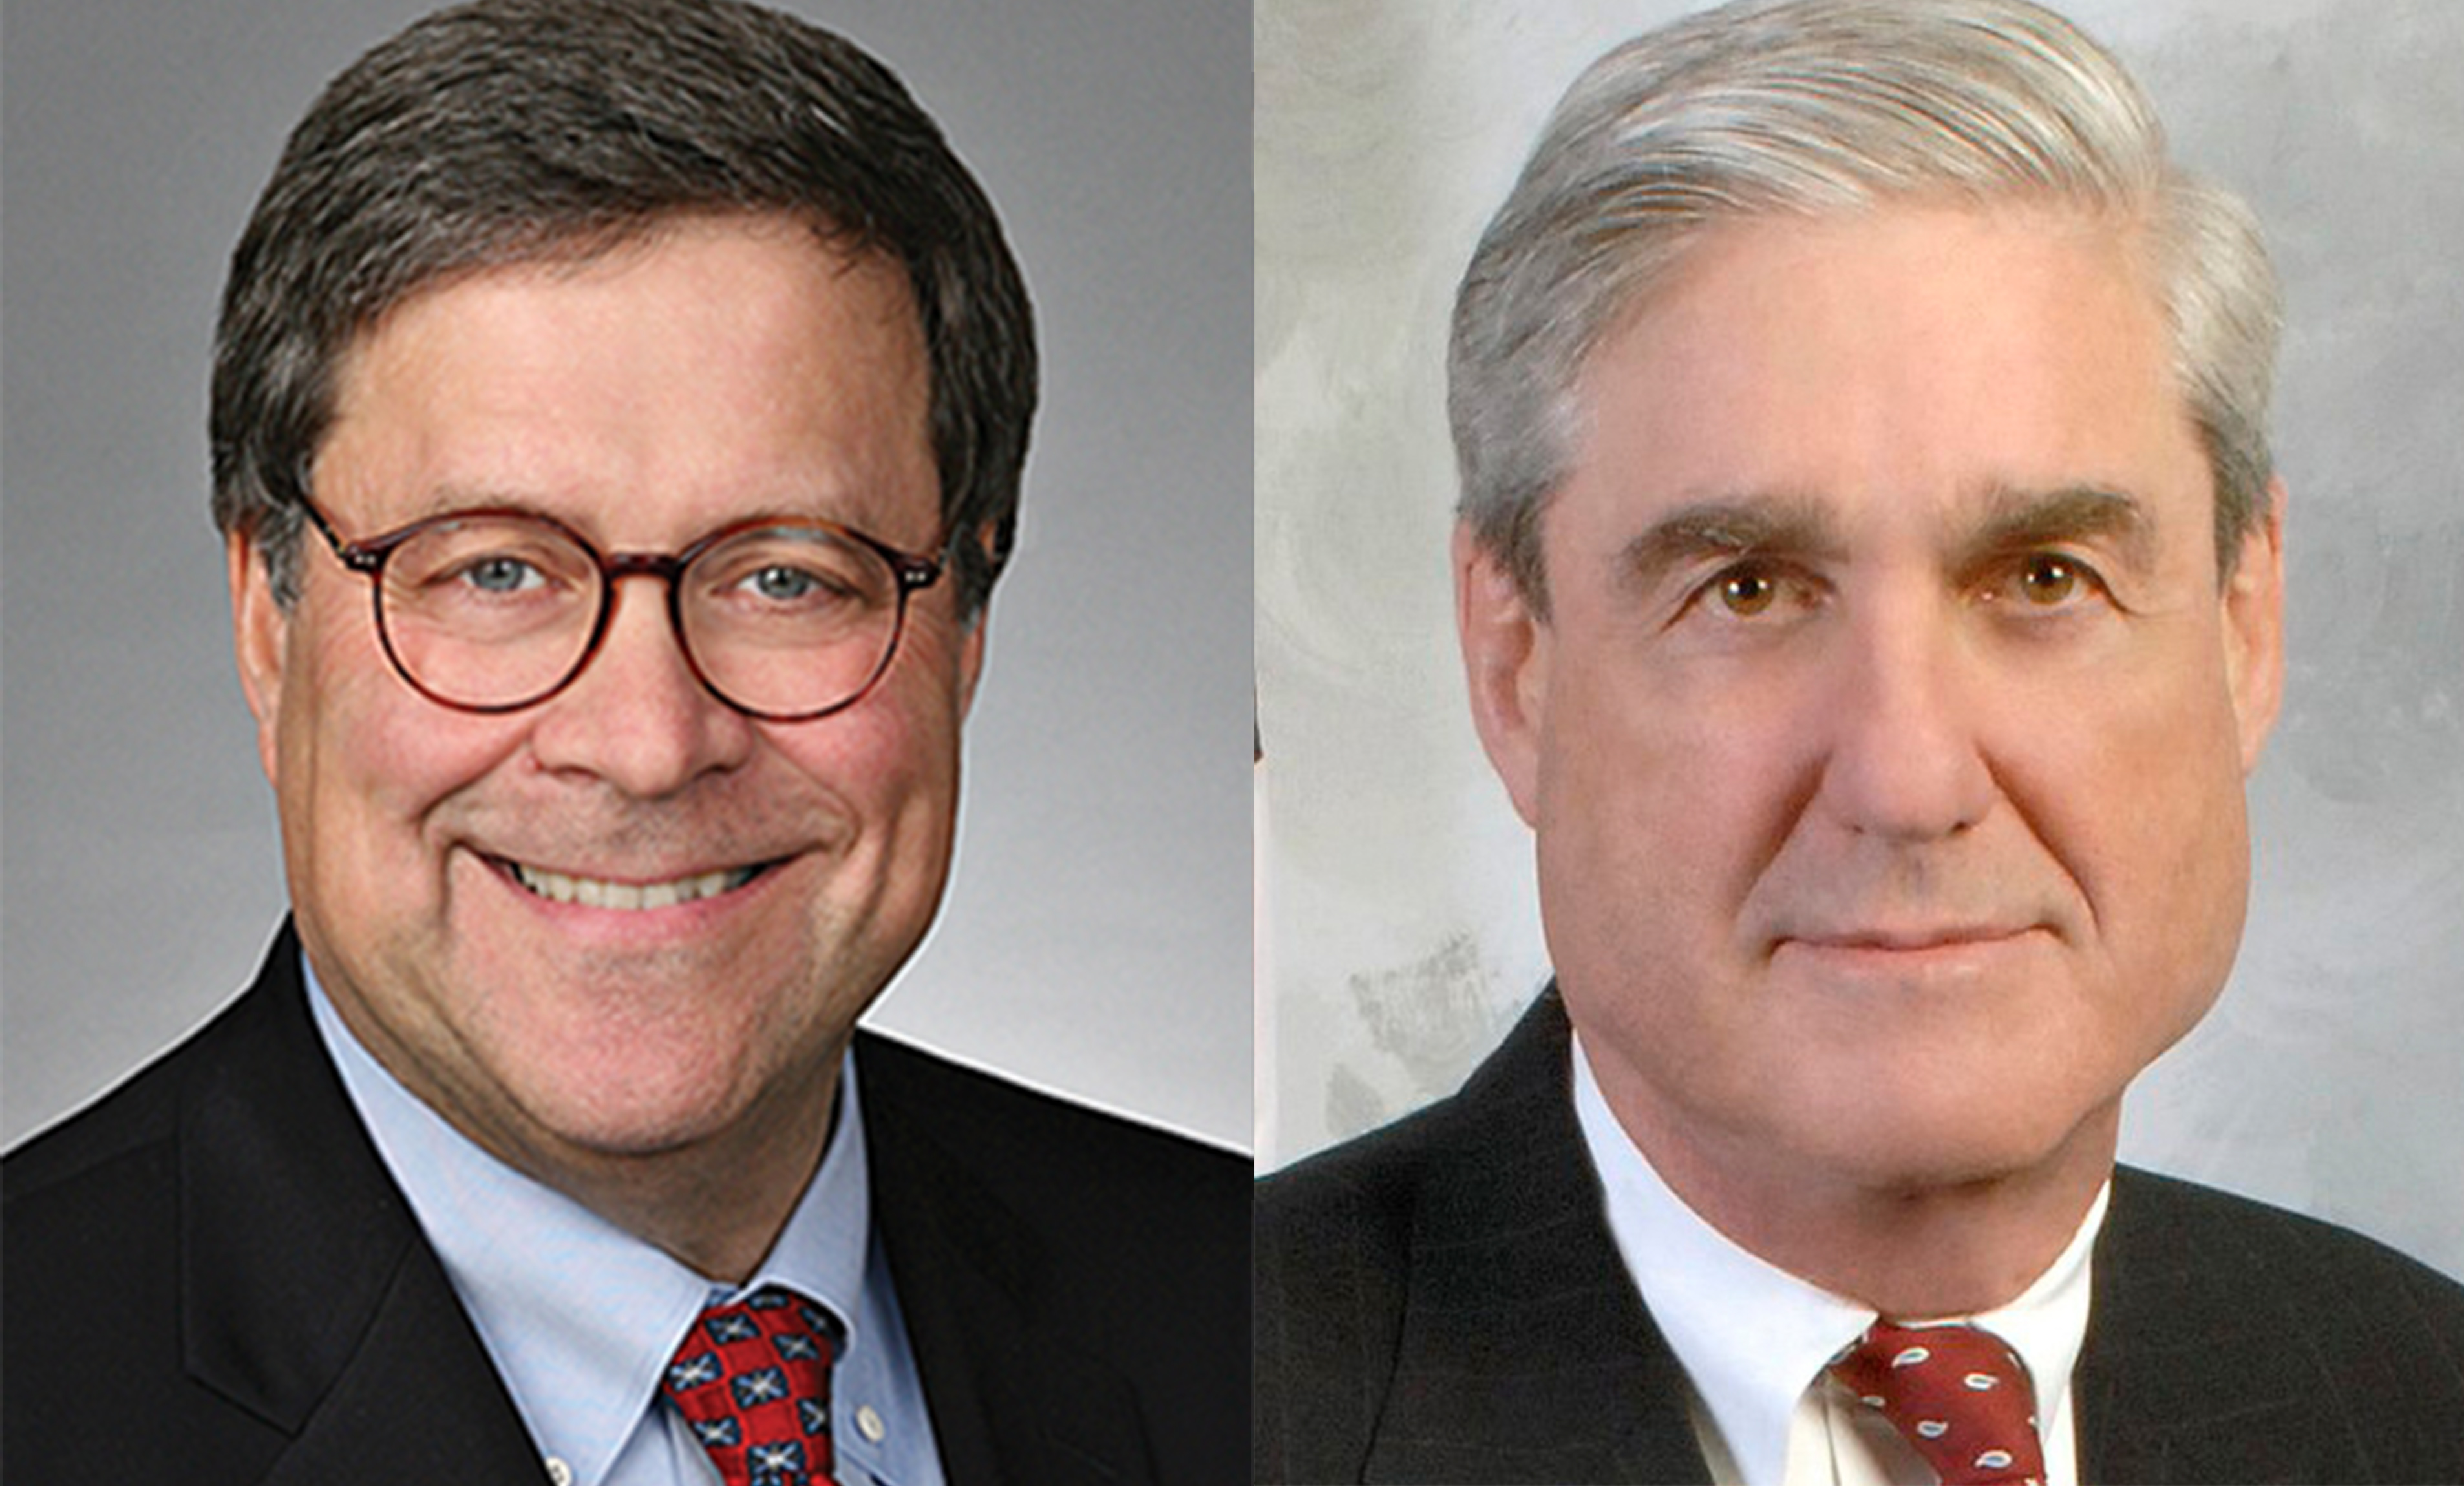 Barr and Mueller